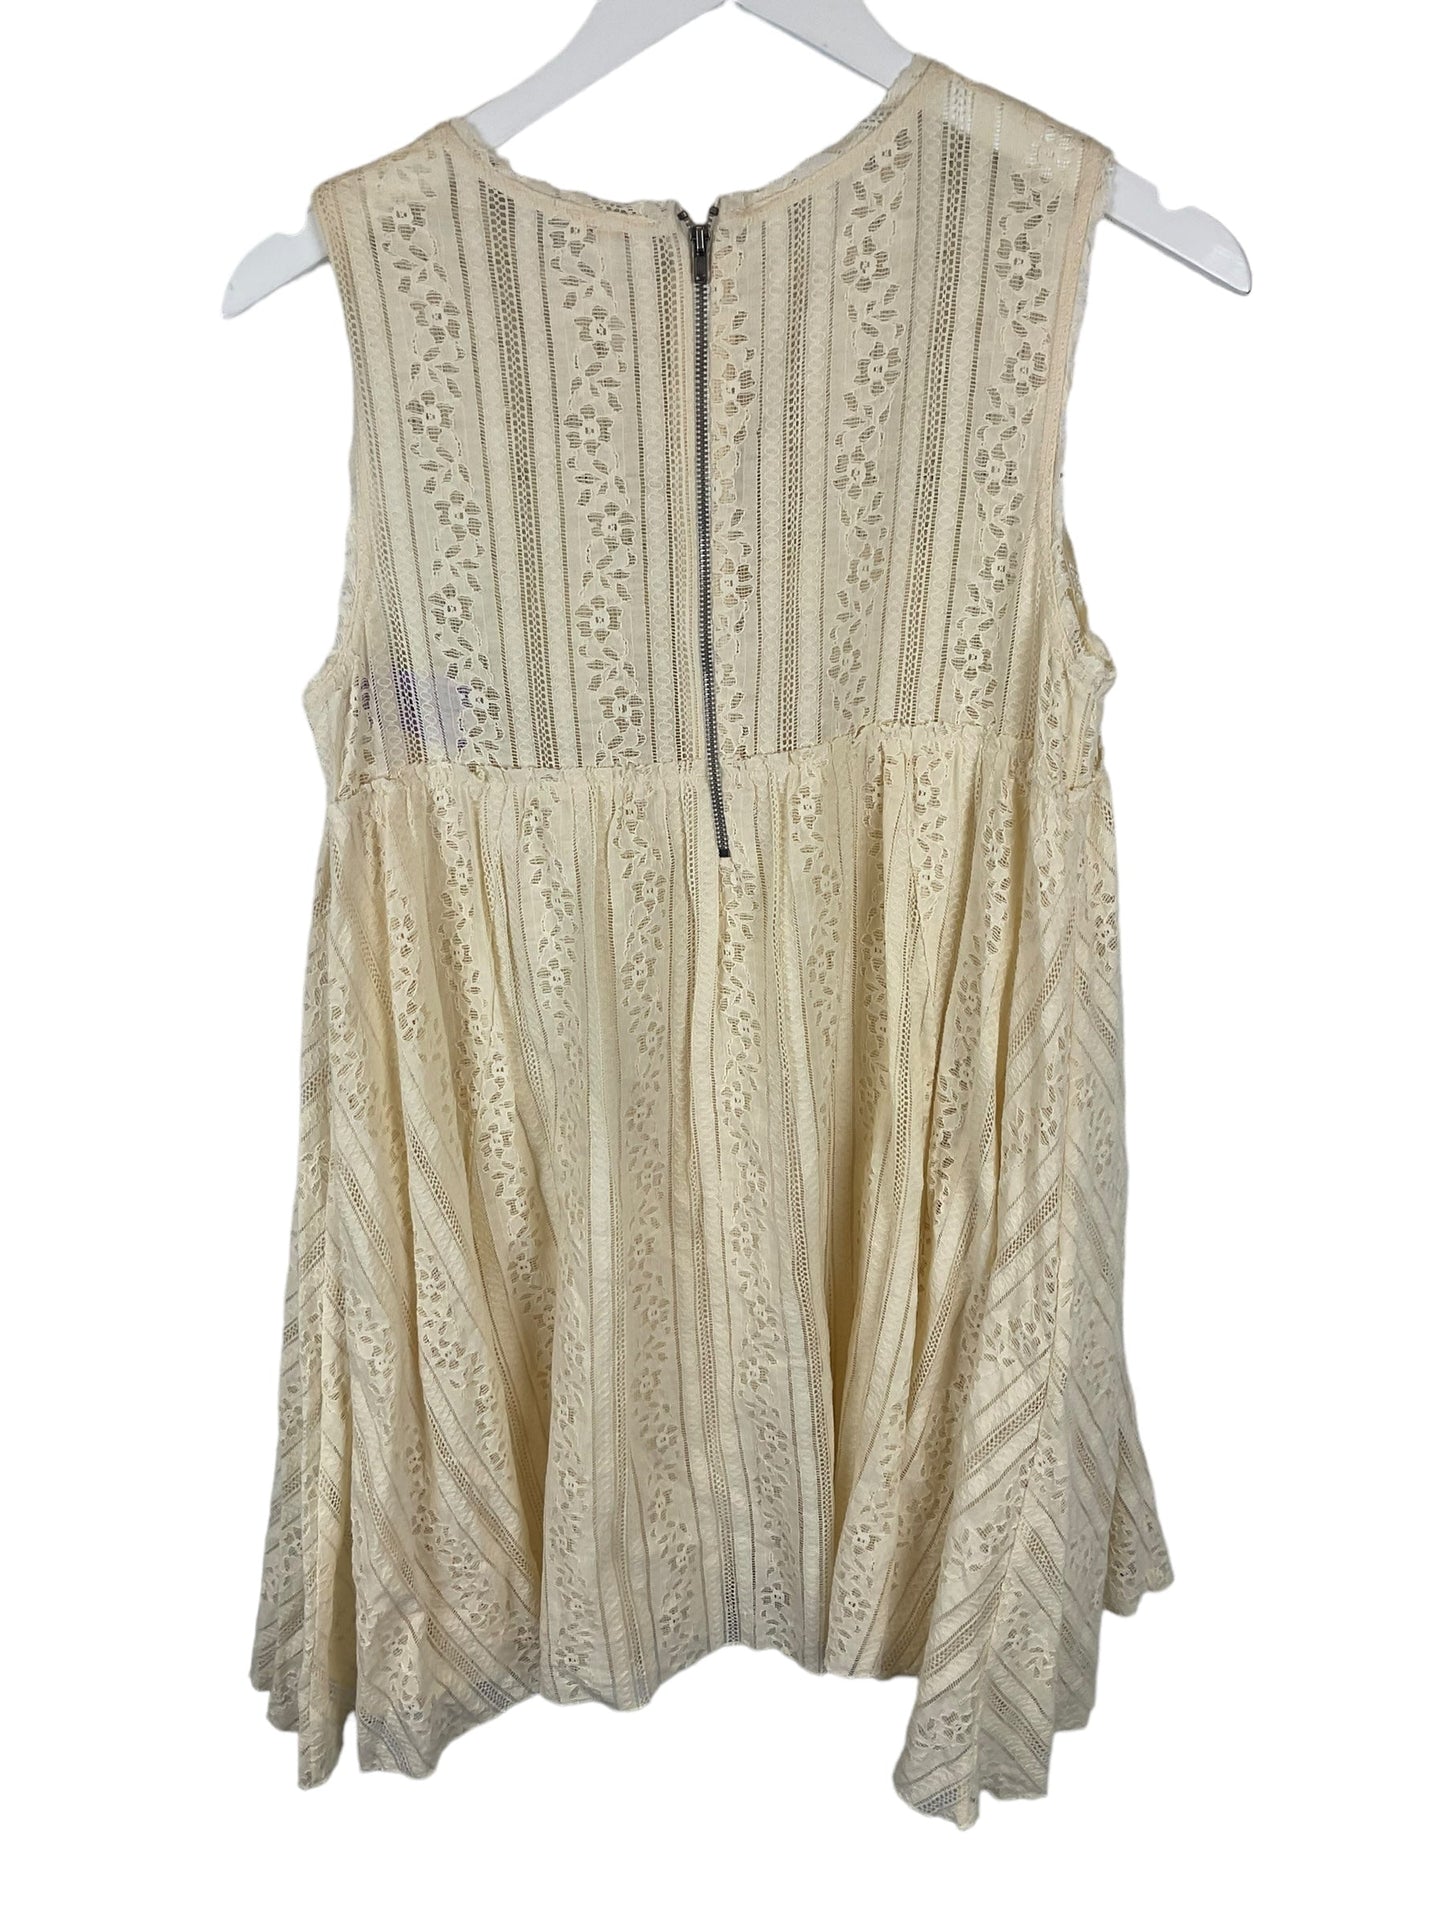 Cream Dress Party Short Free People, Size S